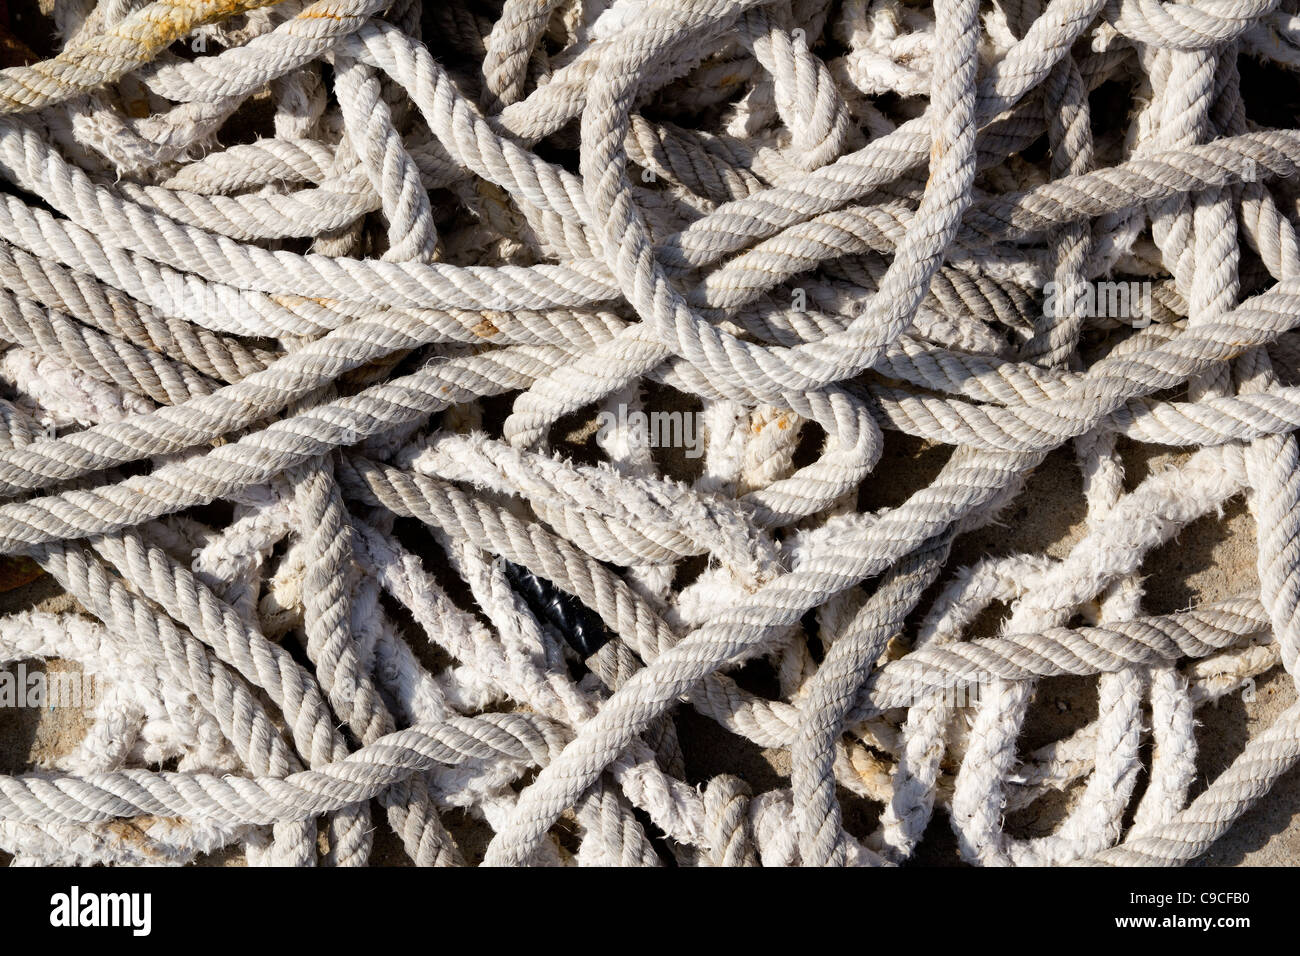 messy braided ropes of fishing tackle equipment Stock Photo - Alamy